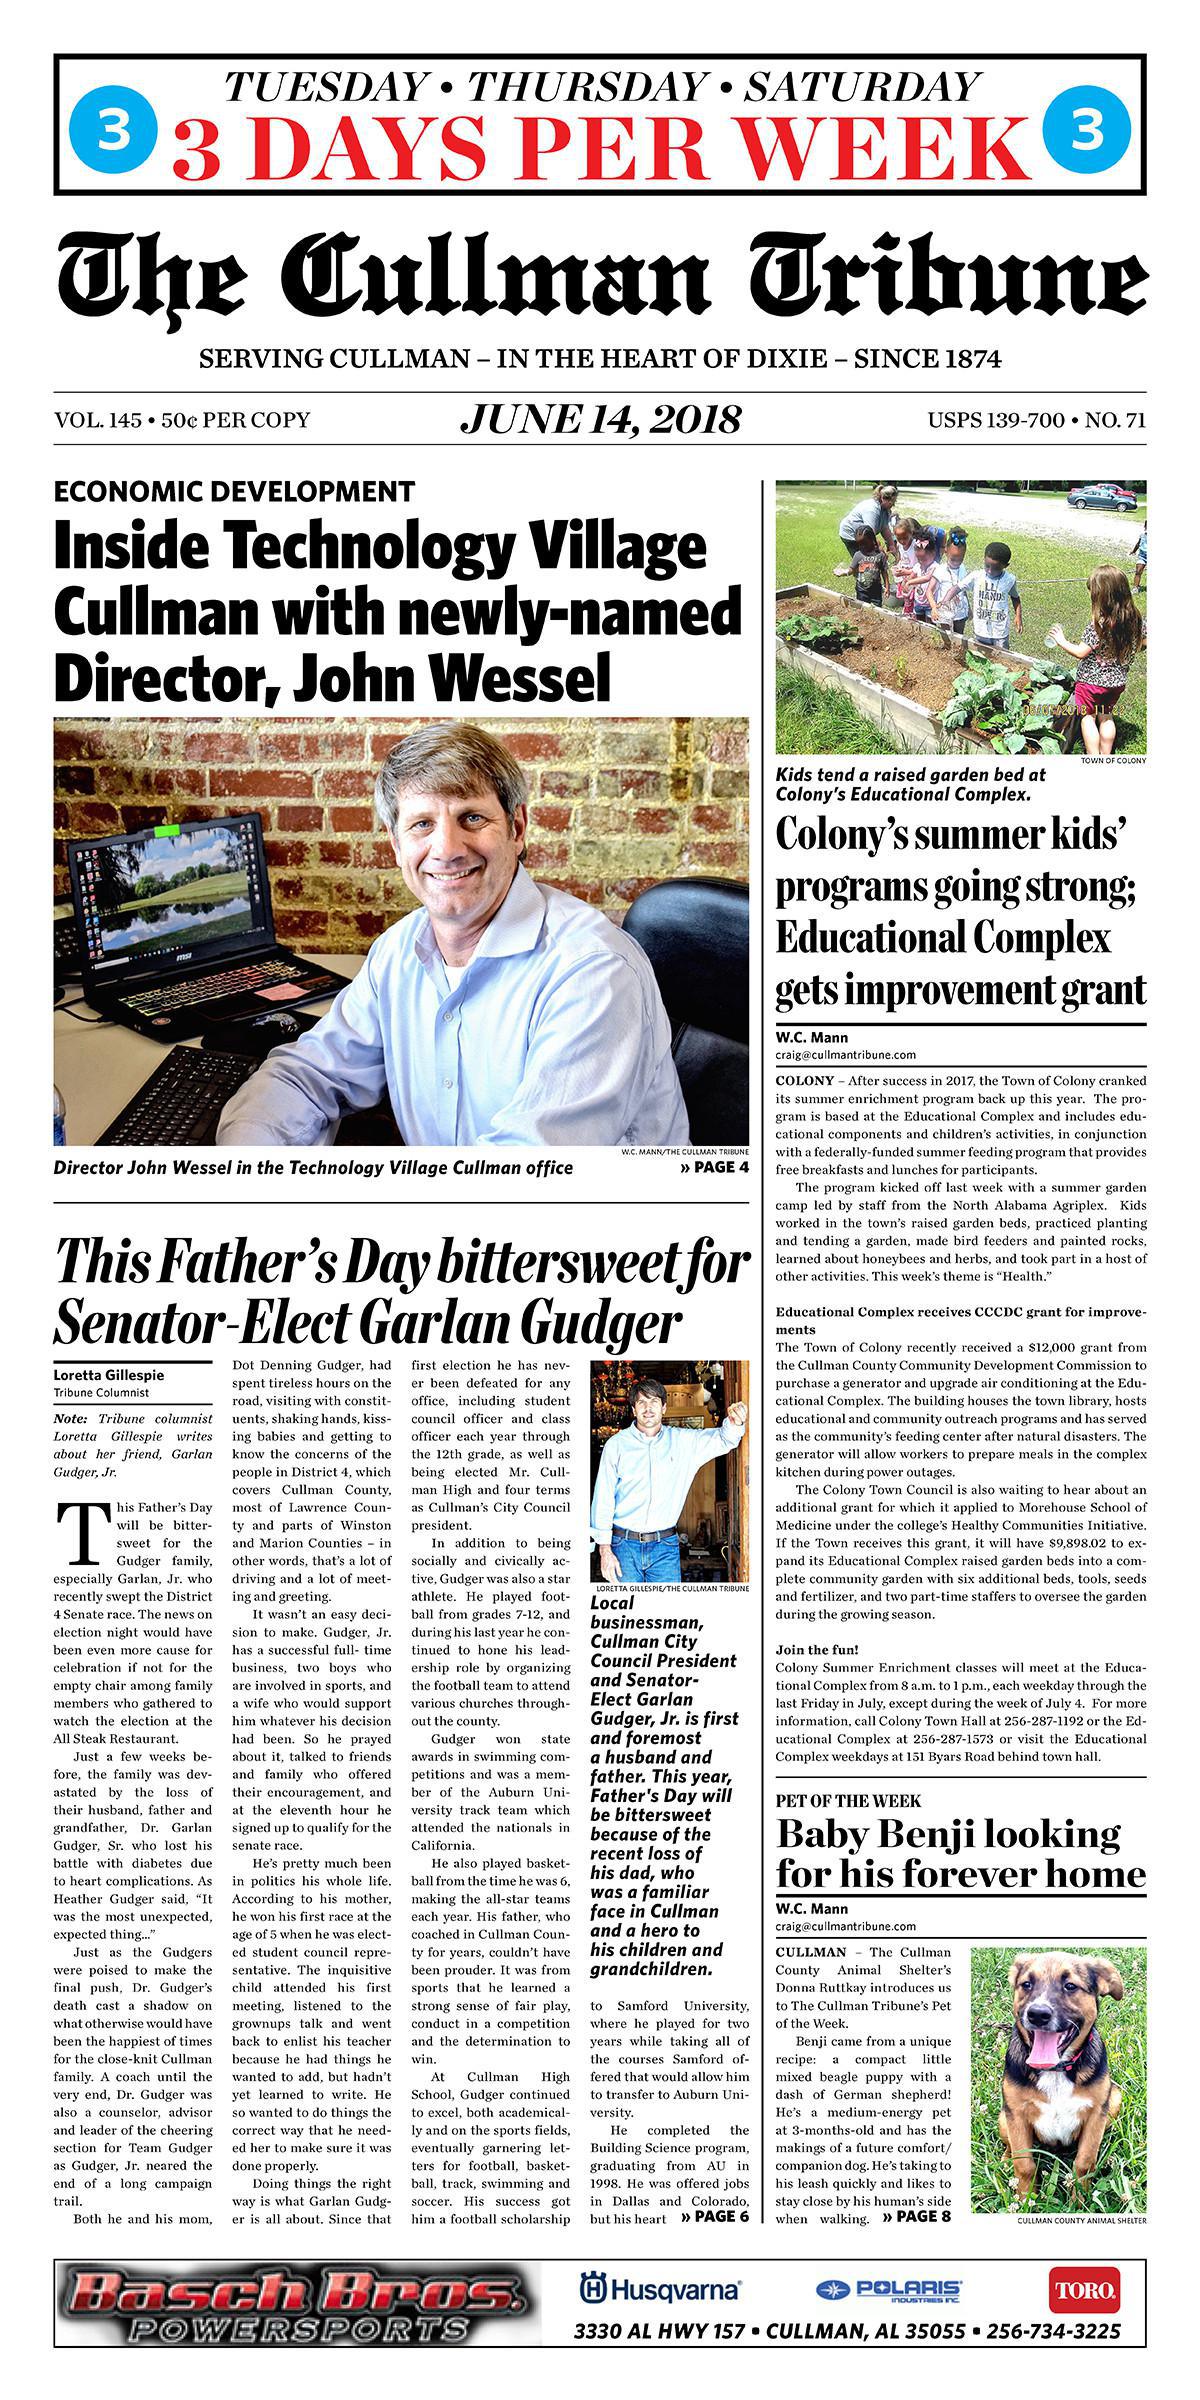 Good Morning Cullman! The 06-14-2018 edition of the Cullman Tribune is now ready to view